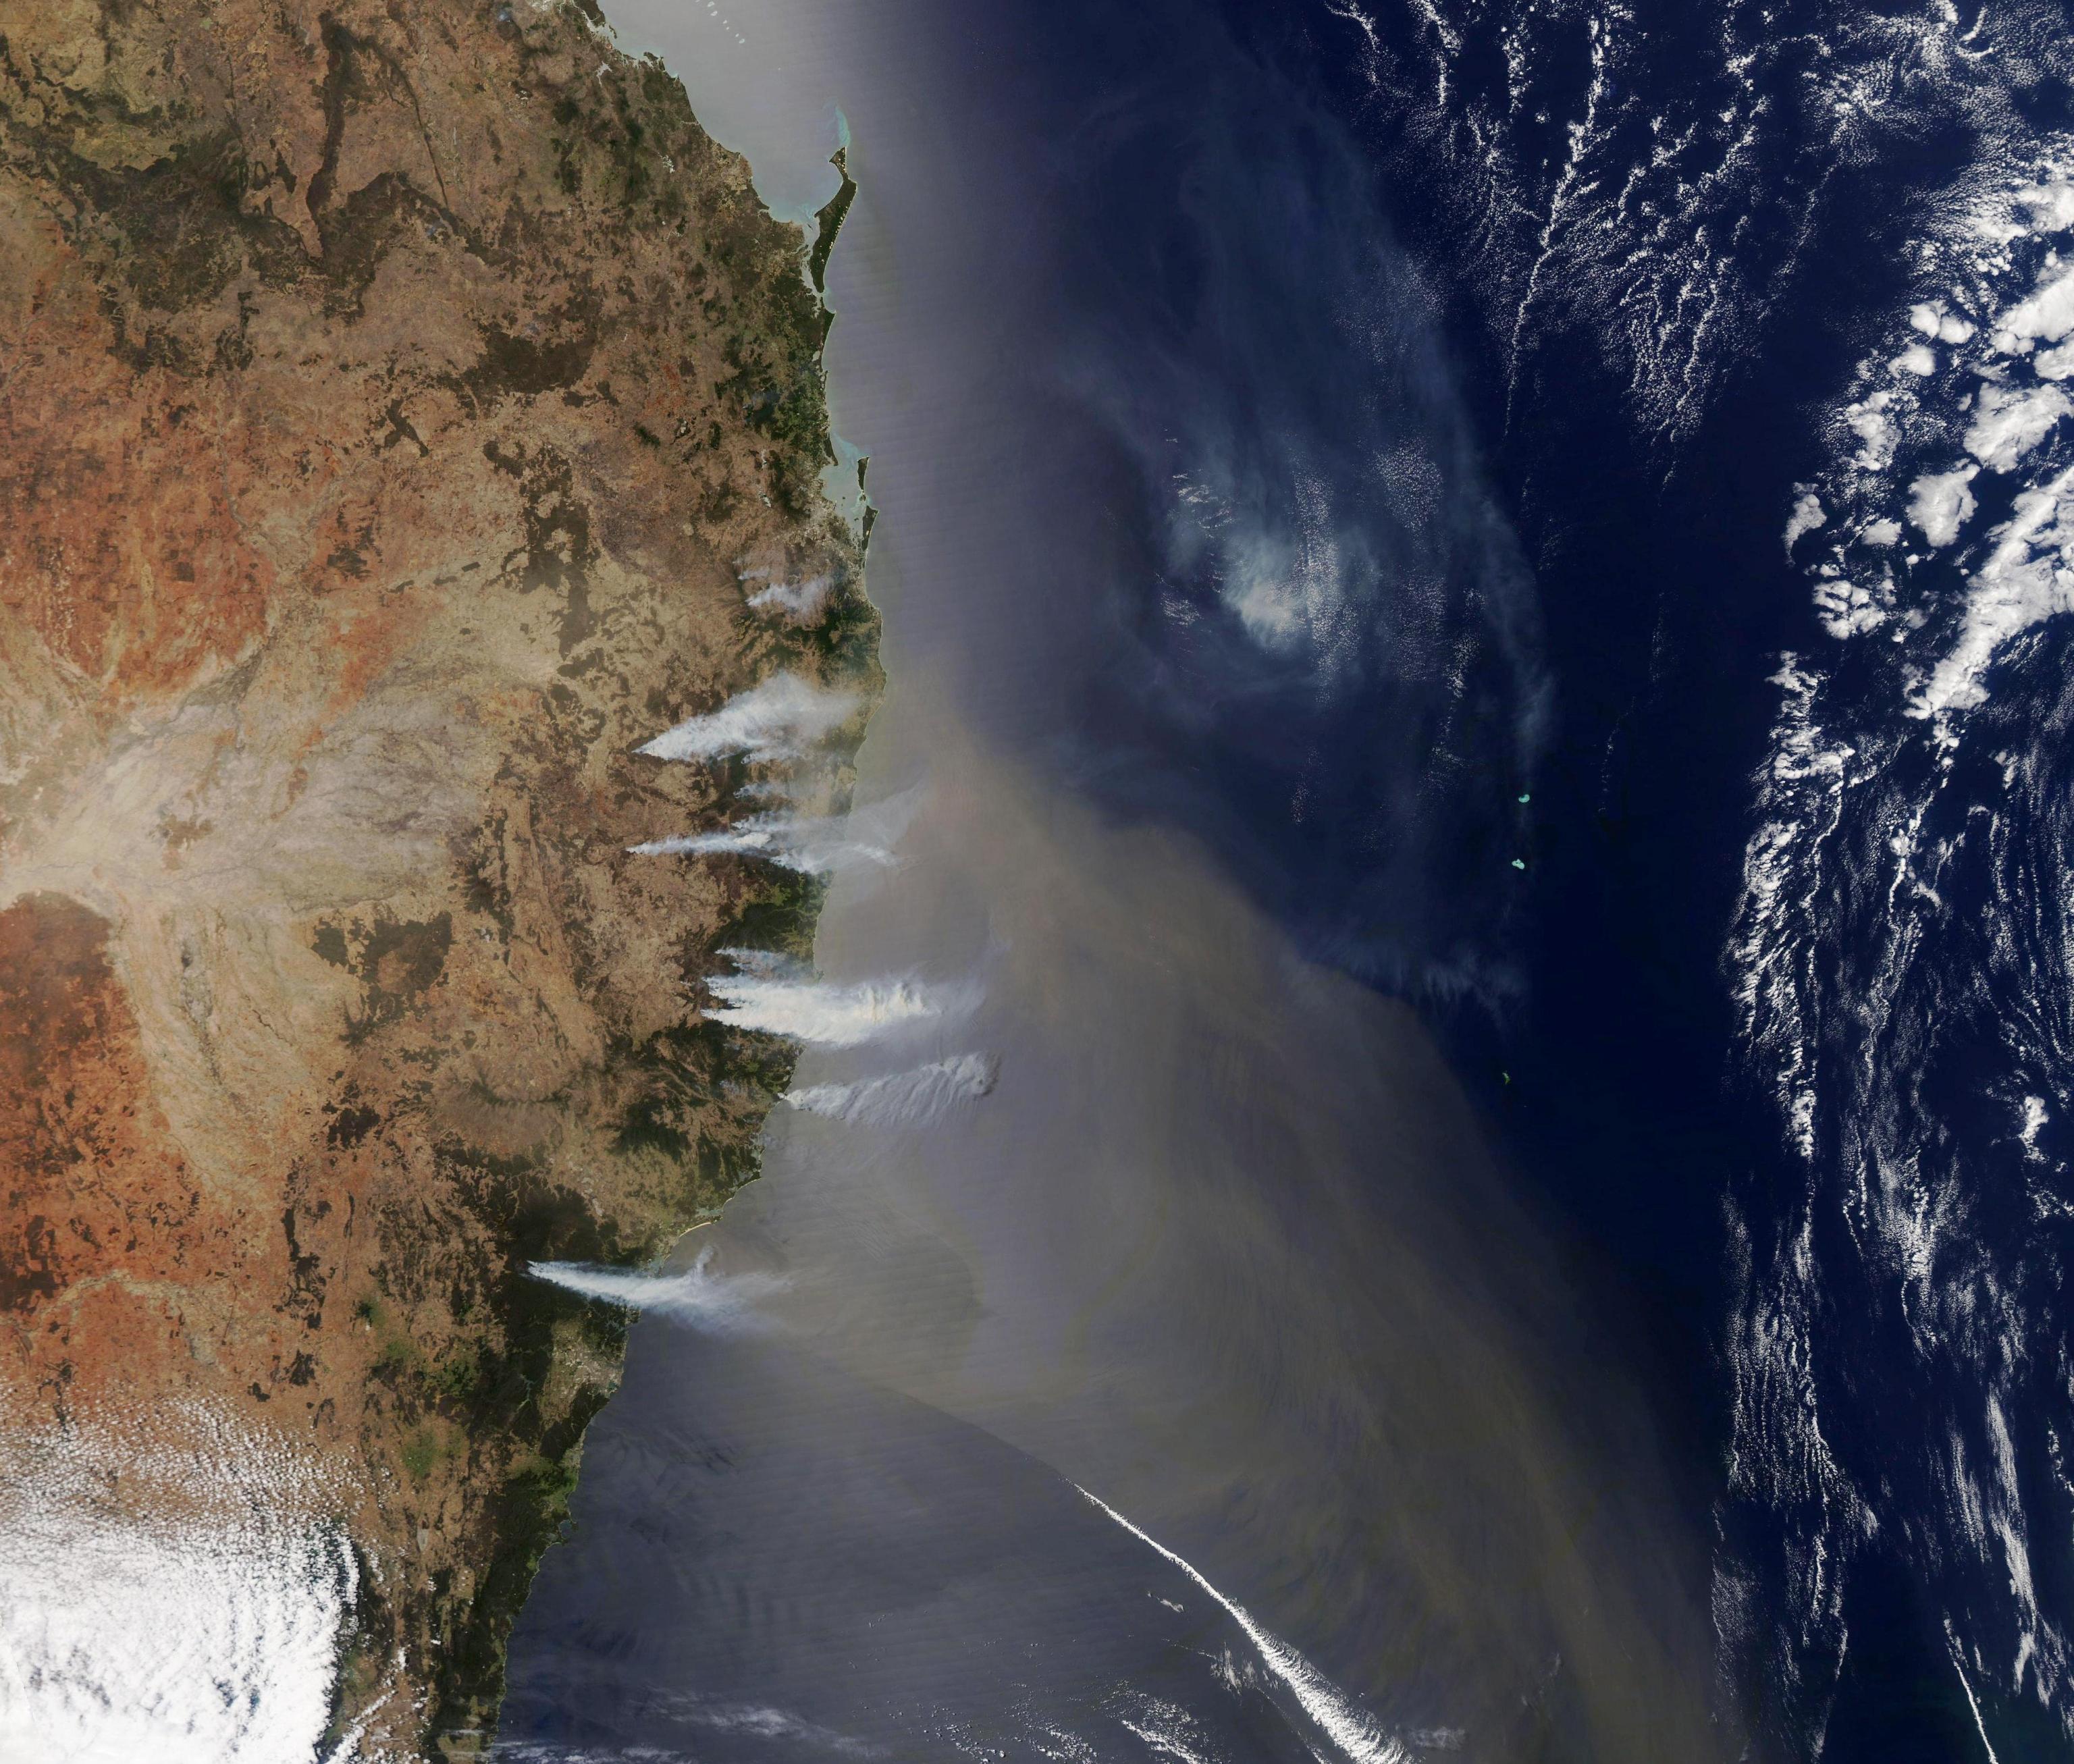 epa07981601 A handout photo made available by NASA Earth Observatory shows a satellite image of destructive bushfires raging near the coast of New South Wales, Australia, 07 November 2019 (issued 08 November 2019), sending smoke billowing over the Tasman Sea. Fires that day burned from north of Sydney to near the border with Queensland. According to the New South Wales Rural Fire Service, 29 of the 69 fires burning across the state remained uncontrolled.  EPA/NASA EARTH OBSERVATORY HANDOUT  HANDOUT EDITORIAL USE ONLY/NO SALES